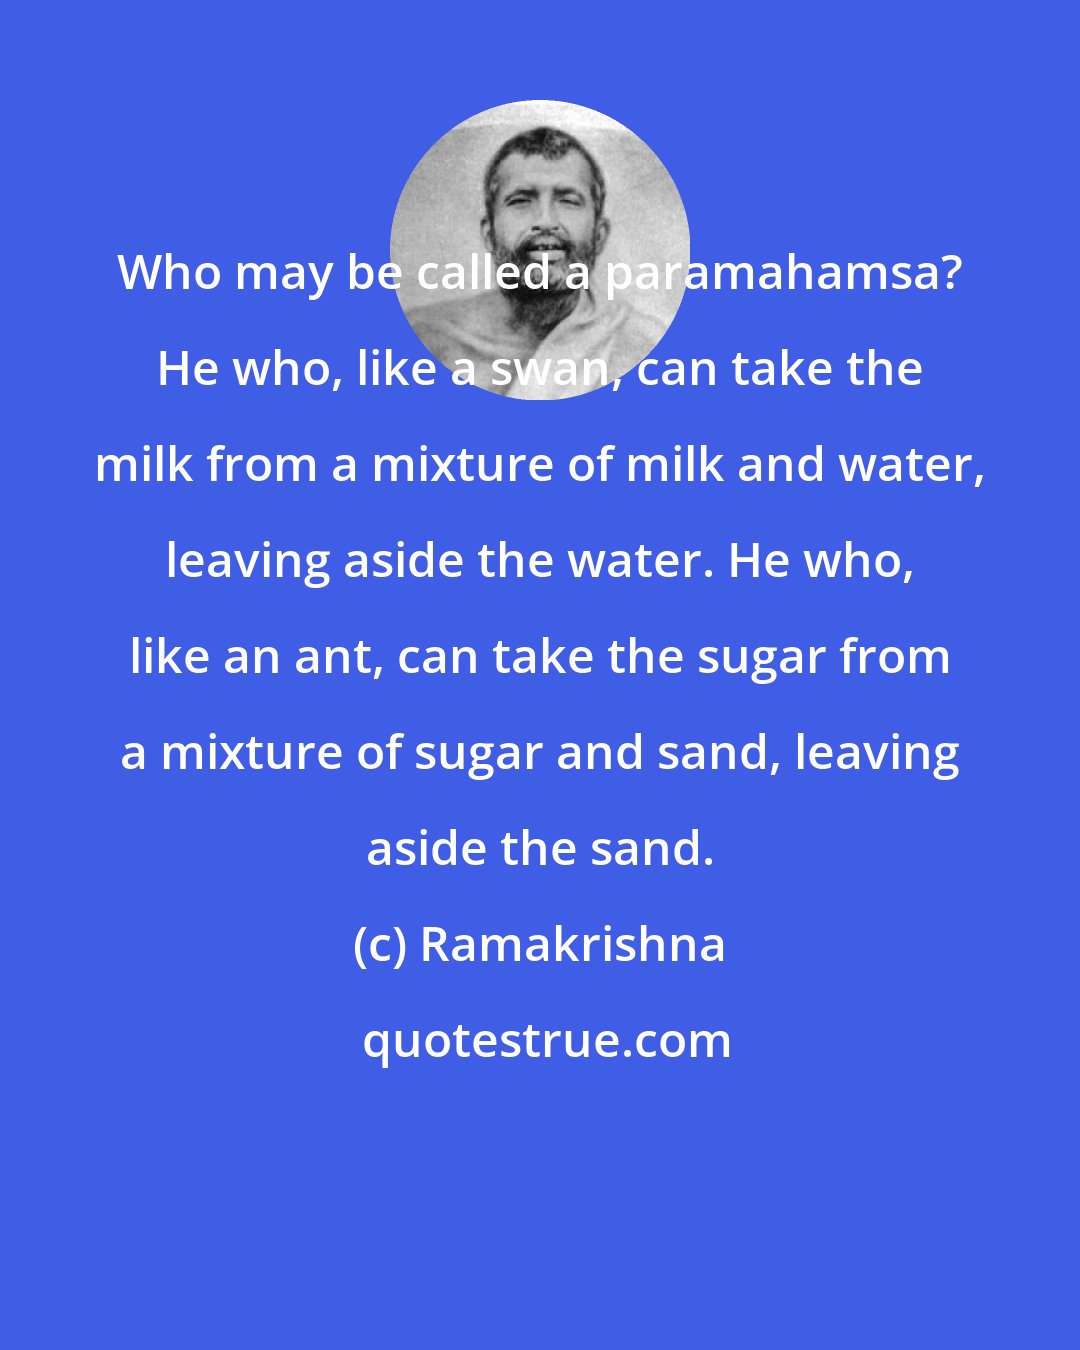 Ramakrishna: Who may be called a paramahamsa? He who, like a swan, can take the milk from a mixture of milk and water, leaving aside the water. He who, like an ant, can take the sugar from a mixture of sugar and sand, leaving aside the sand.